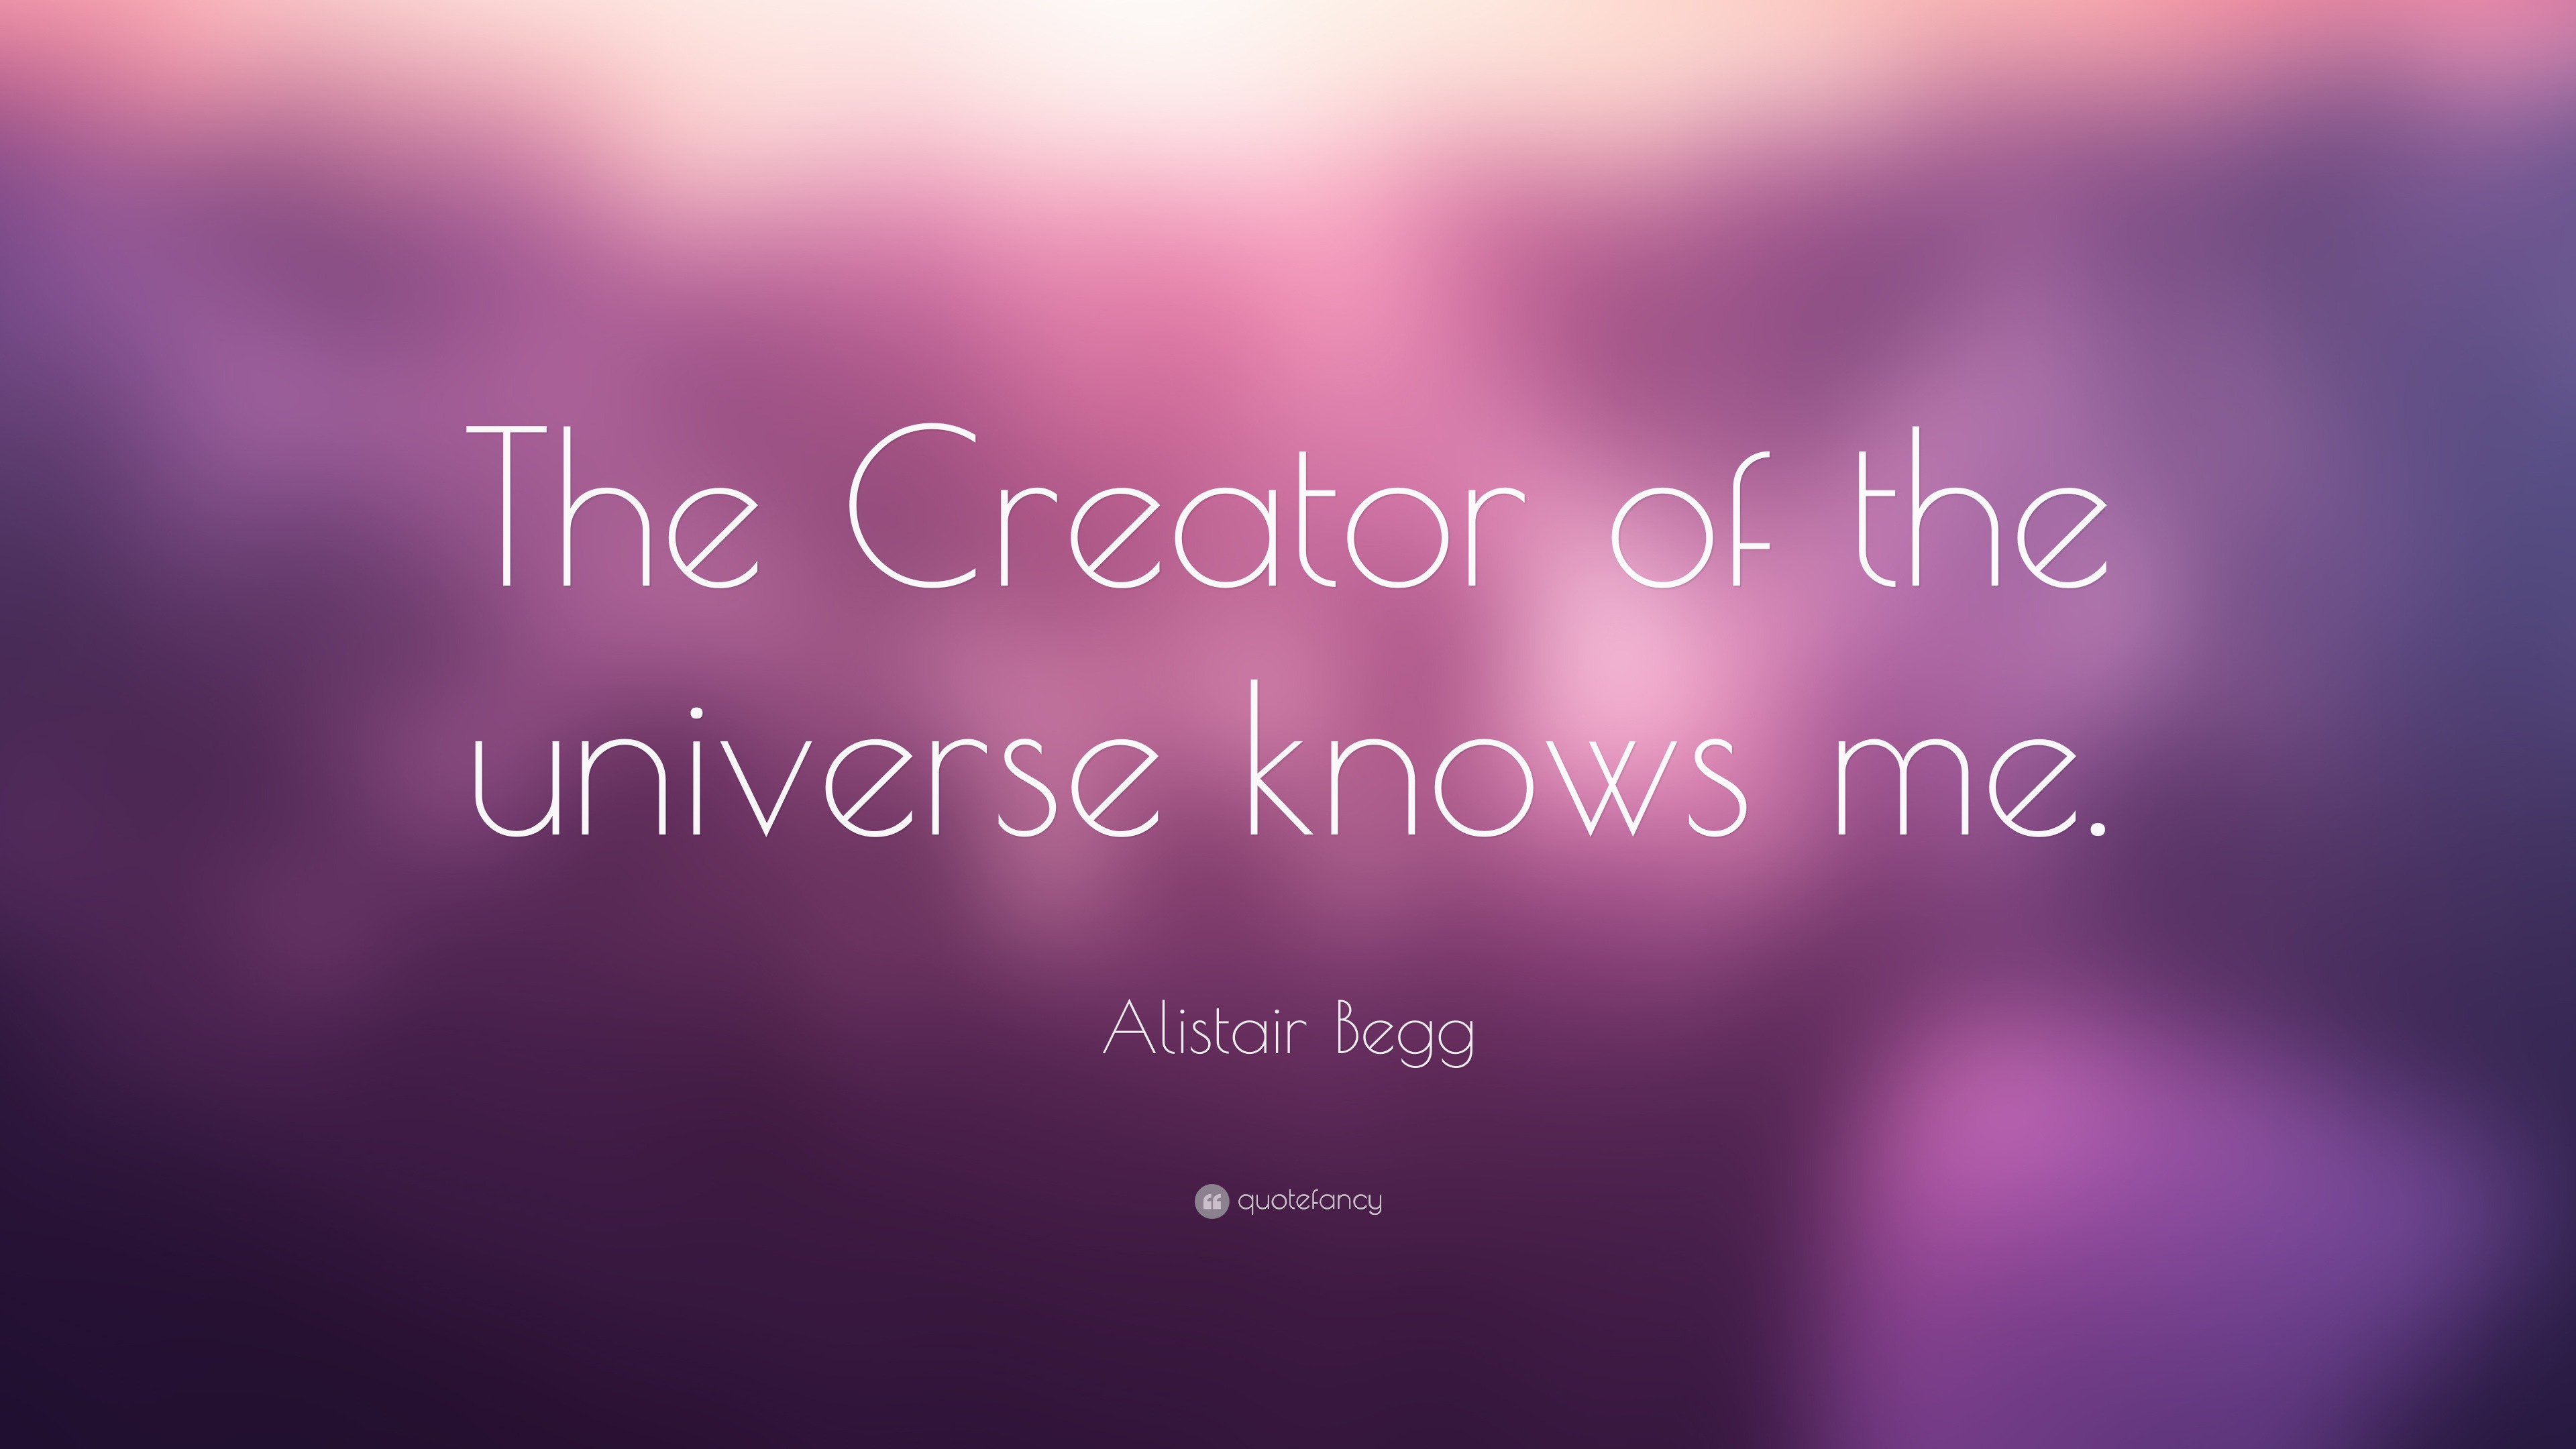 Alistair Begg Quote: “The Creator of the universe knows me.”